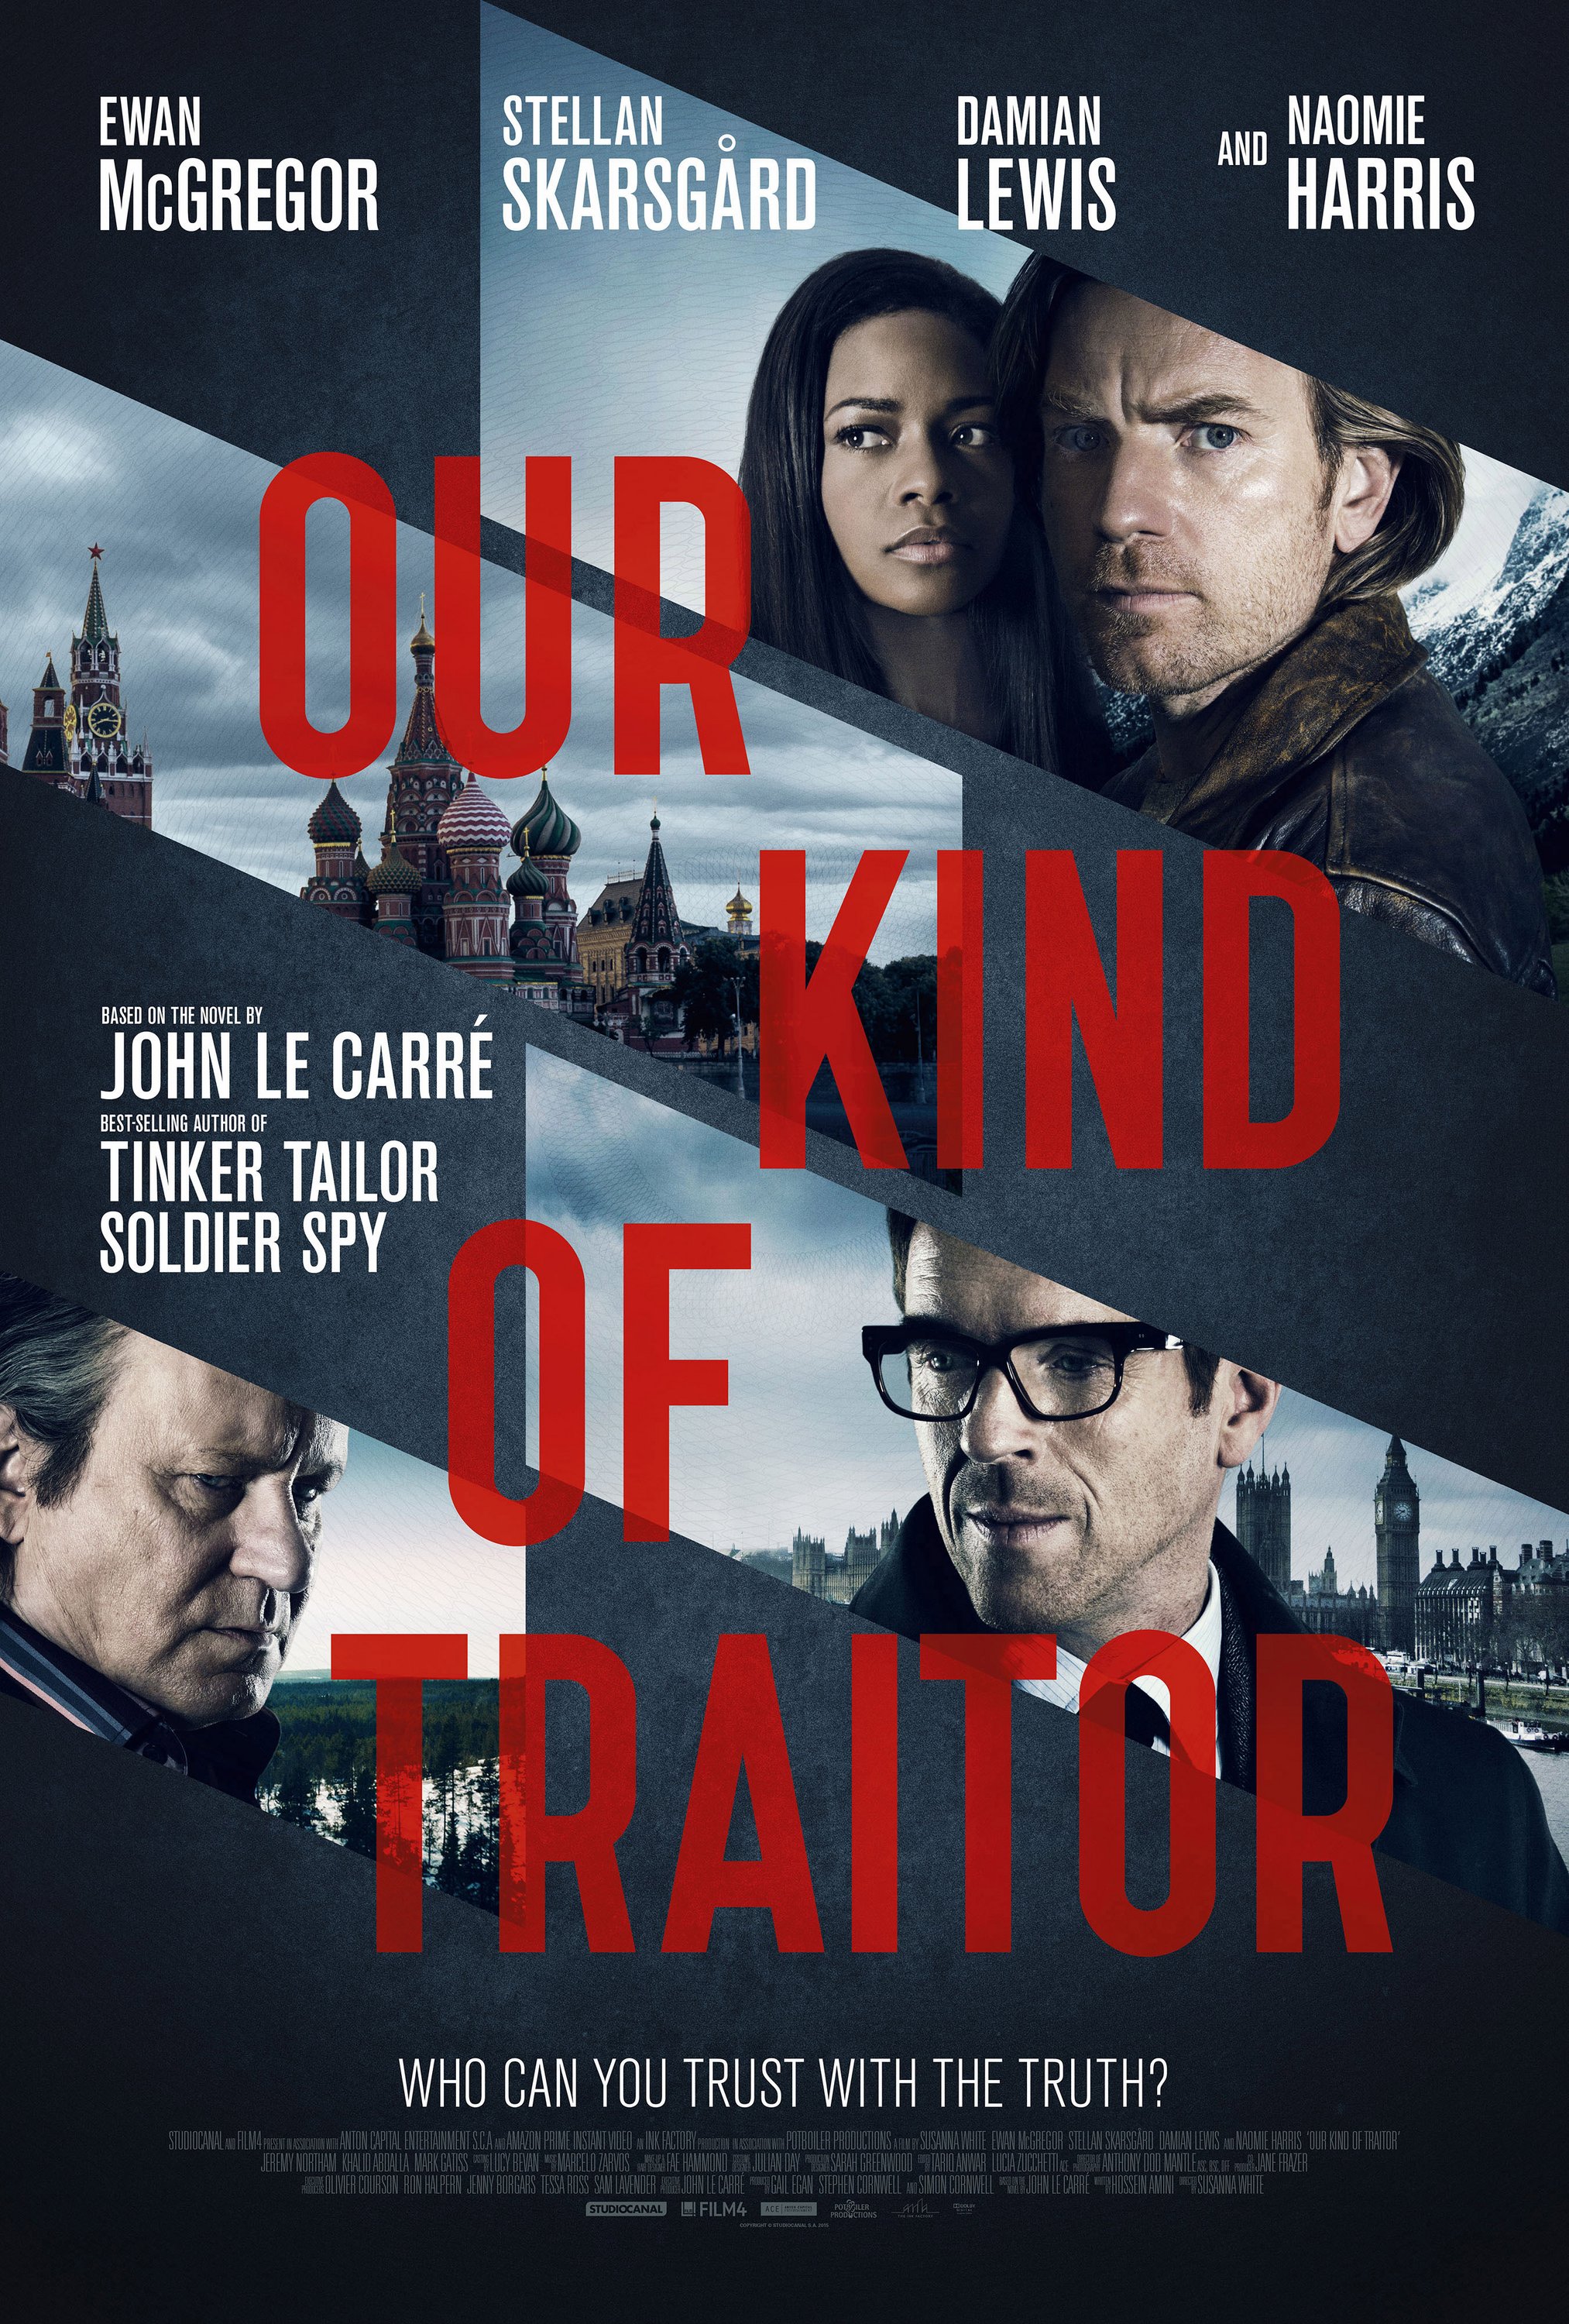 Our-Kind-Of-Traitor-Poster-001.jpg